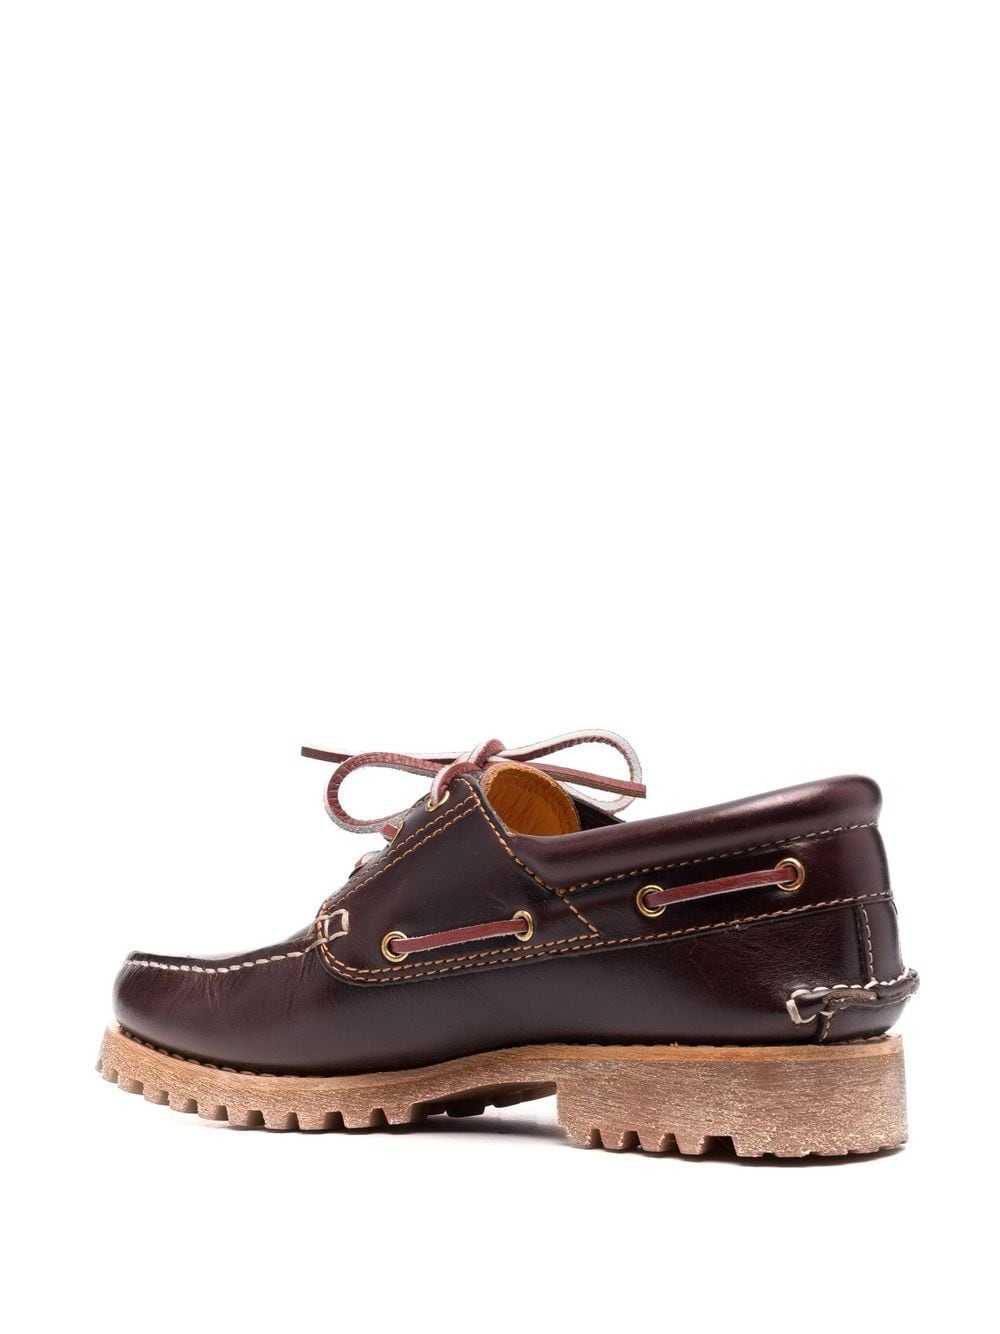 Shop Timberland Handsewn Boat Shoes In Braun